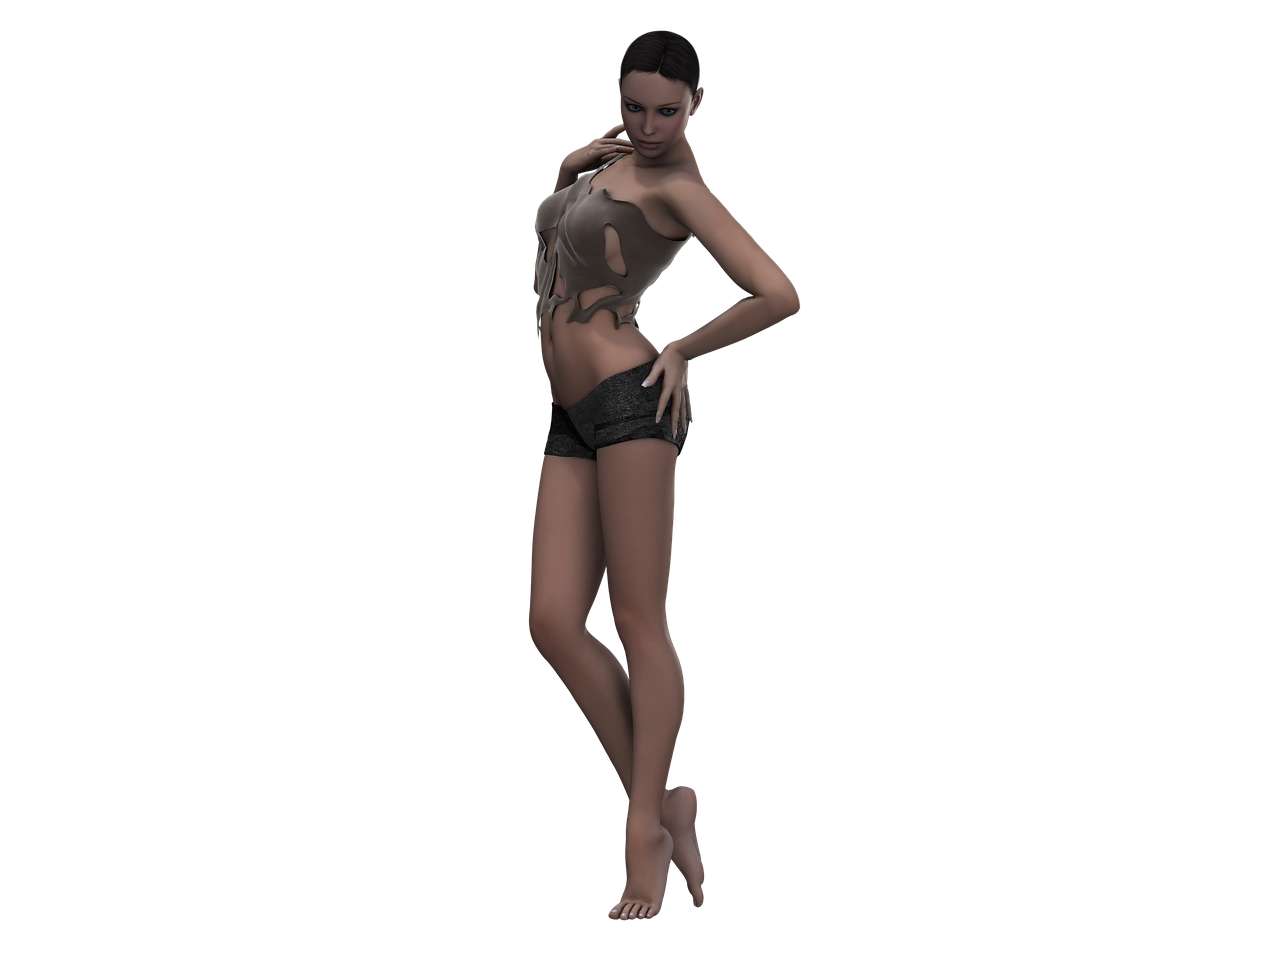 a woman standing with her hands on her hips, a raytraced image, by Aleksander Gierymski, zbrush central contest winner, various lacivious seducing poses, supermodel in silent hill, fullbody photo, transparent body